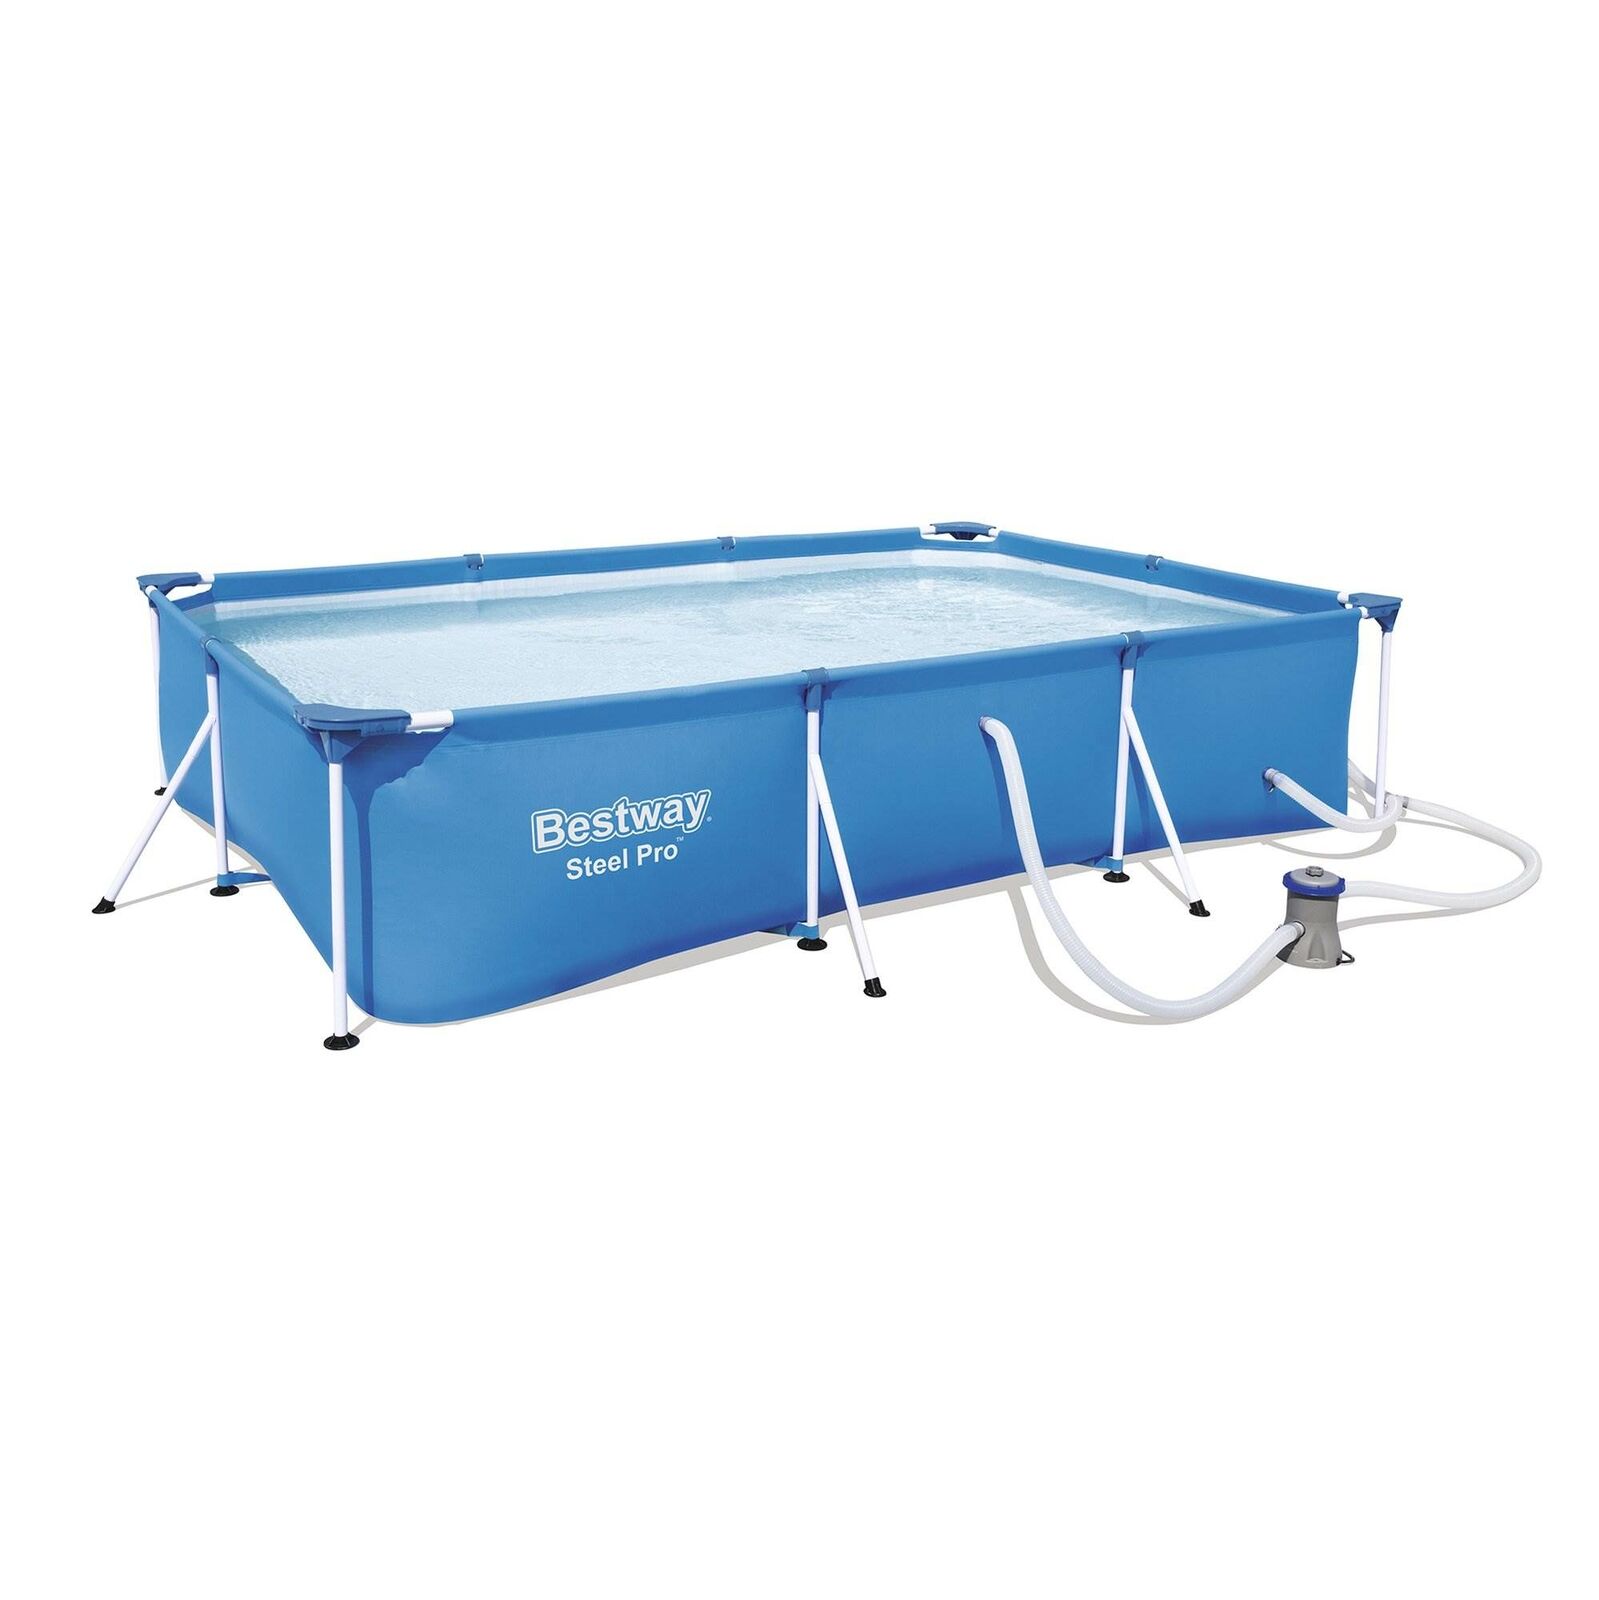 Bestway Steel Pro 9.8ft x 6.6ft x 26in Above Ground Swimming Pool Set with Pump